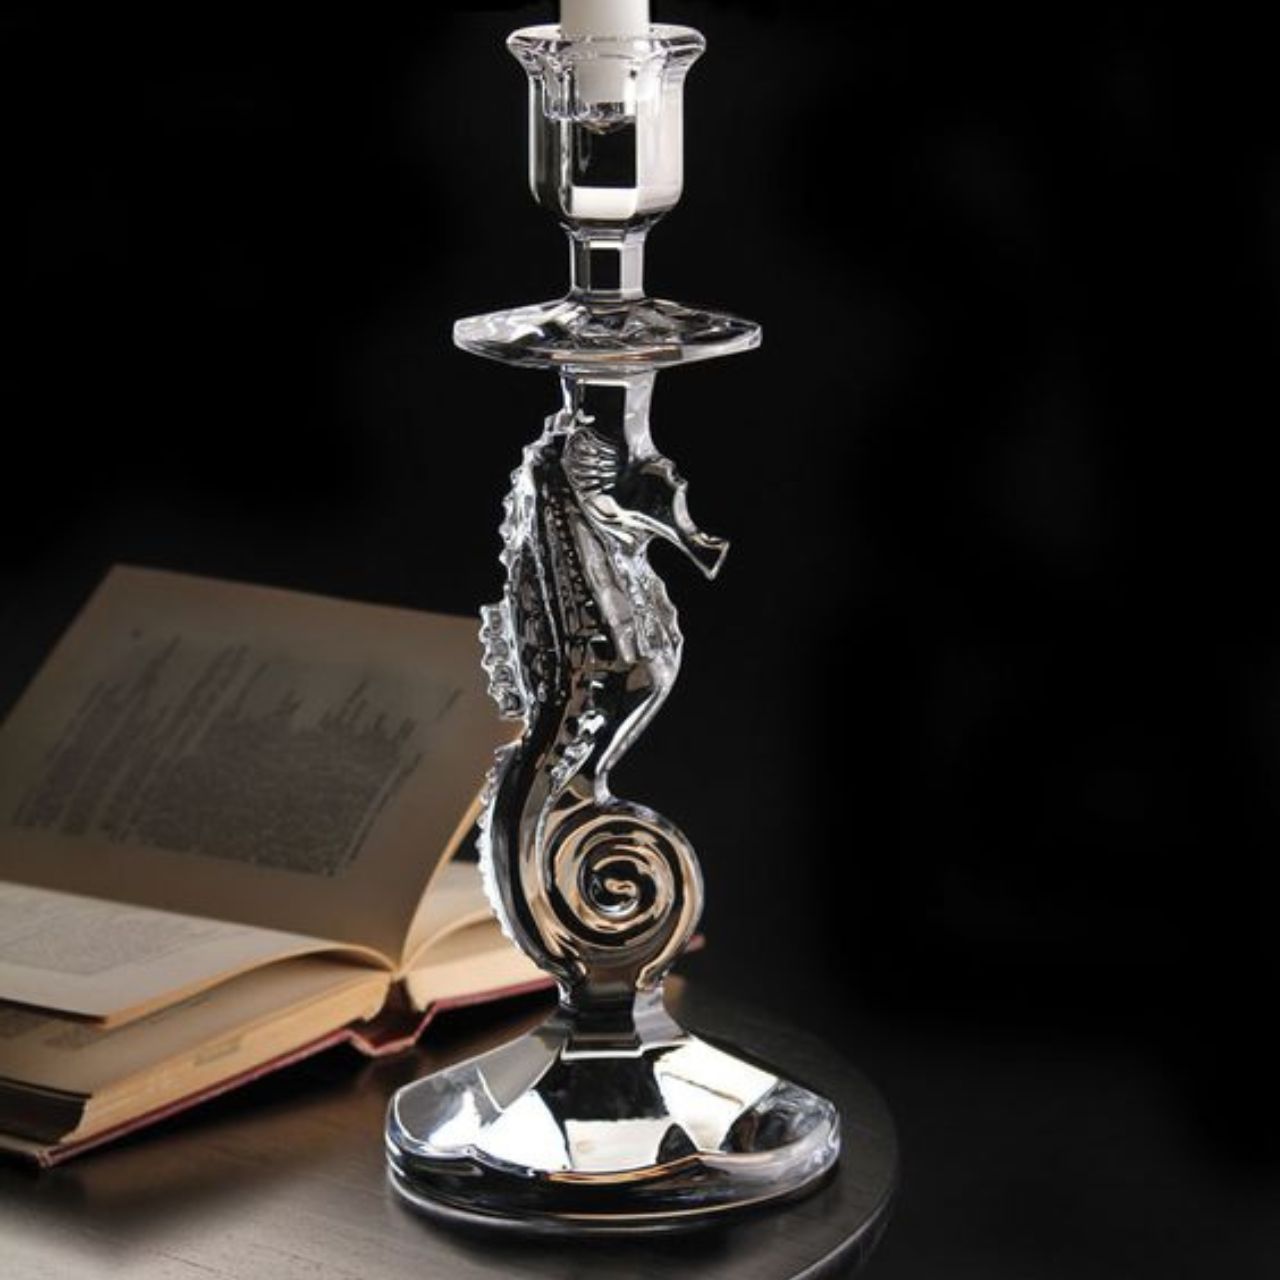 Waterford Crystal ﻿Seahorse Candlestick  A dramatic statement piece, the Collection by Waterford takes inspiration from the logo of the Waterford company and the crest of the historical city of Waterford, where Ireland's premiere fine crystal is produced.